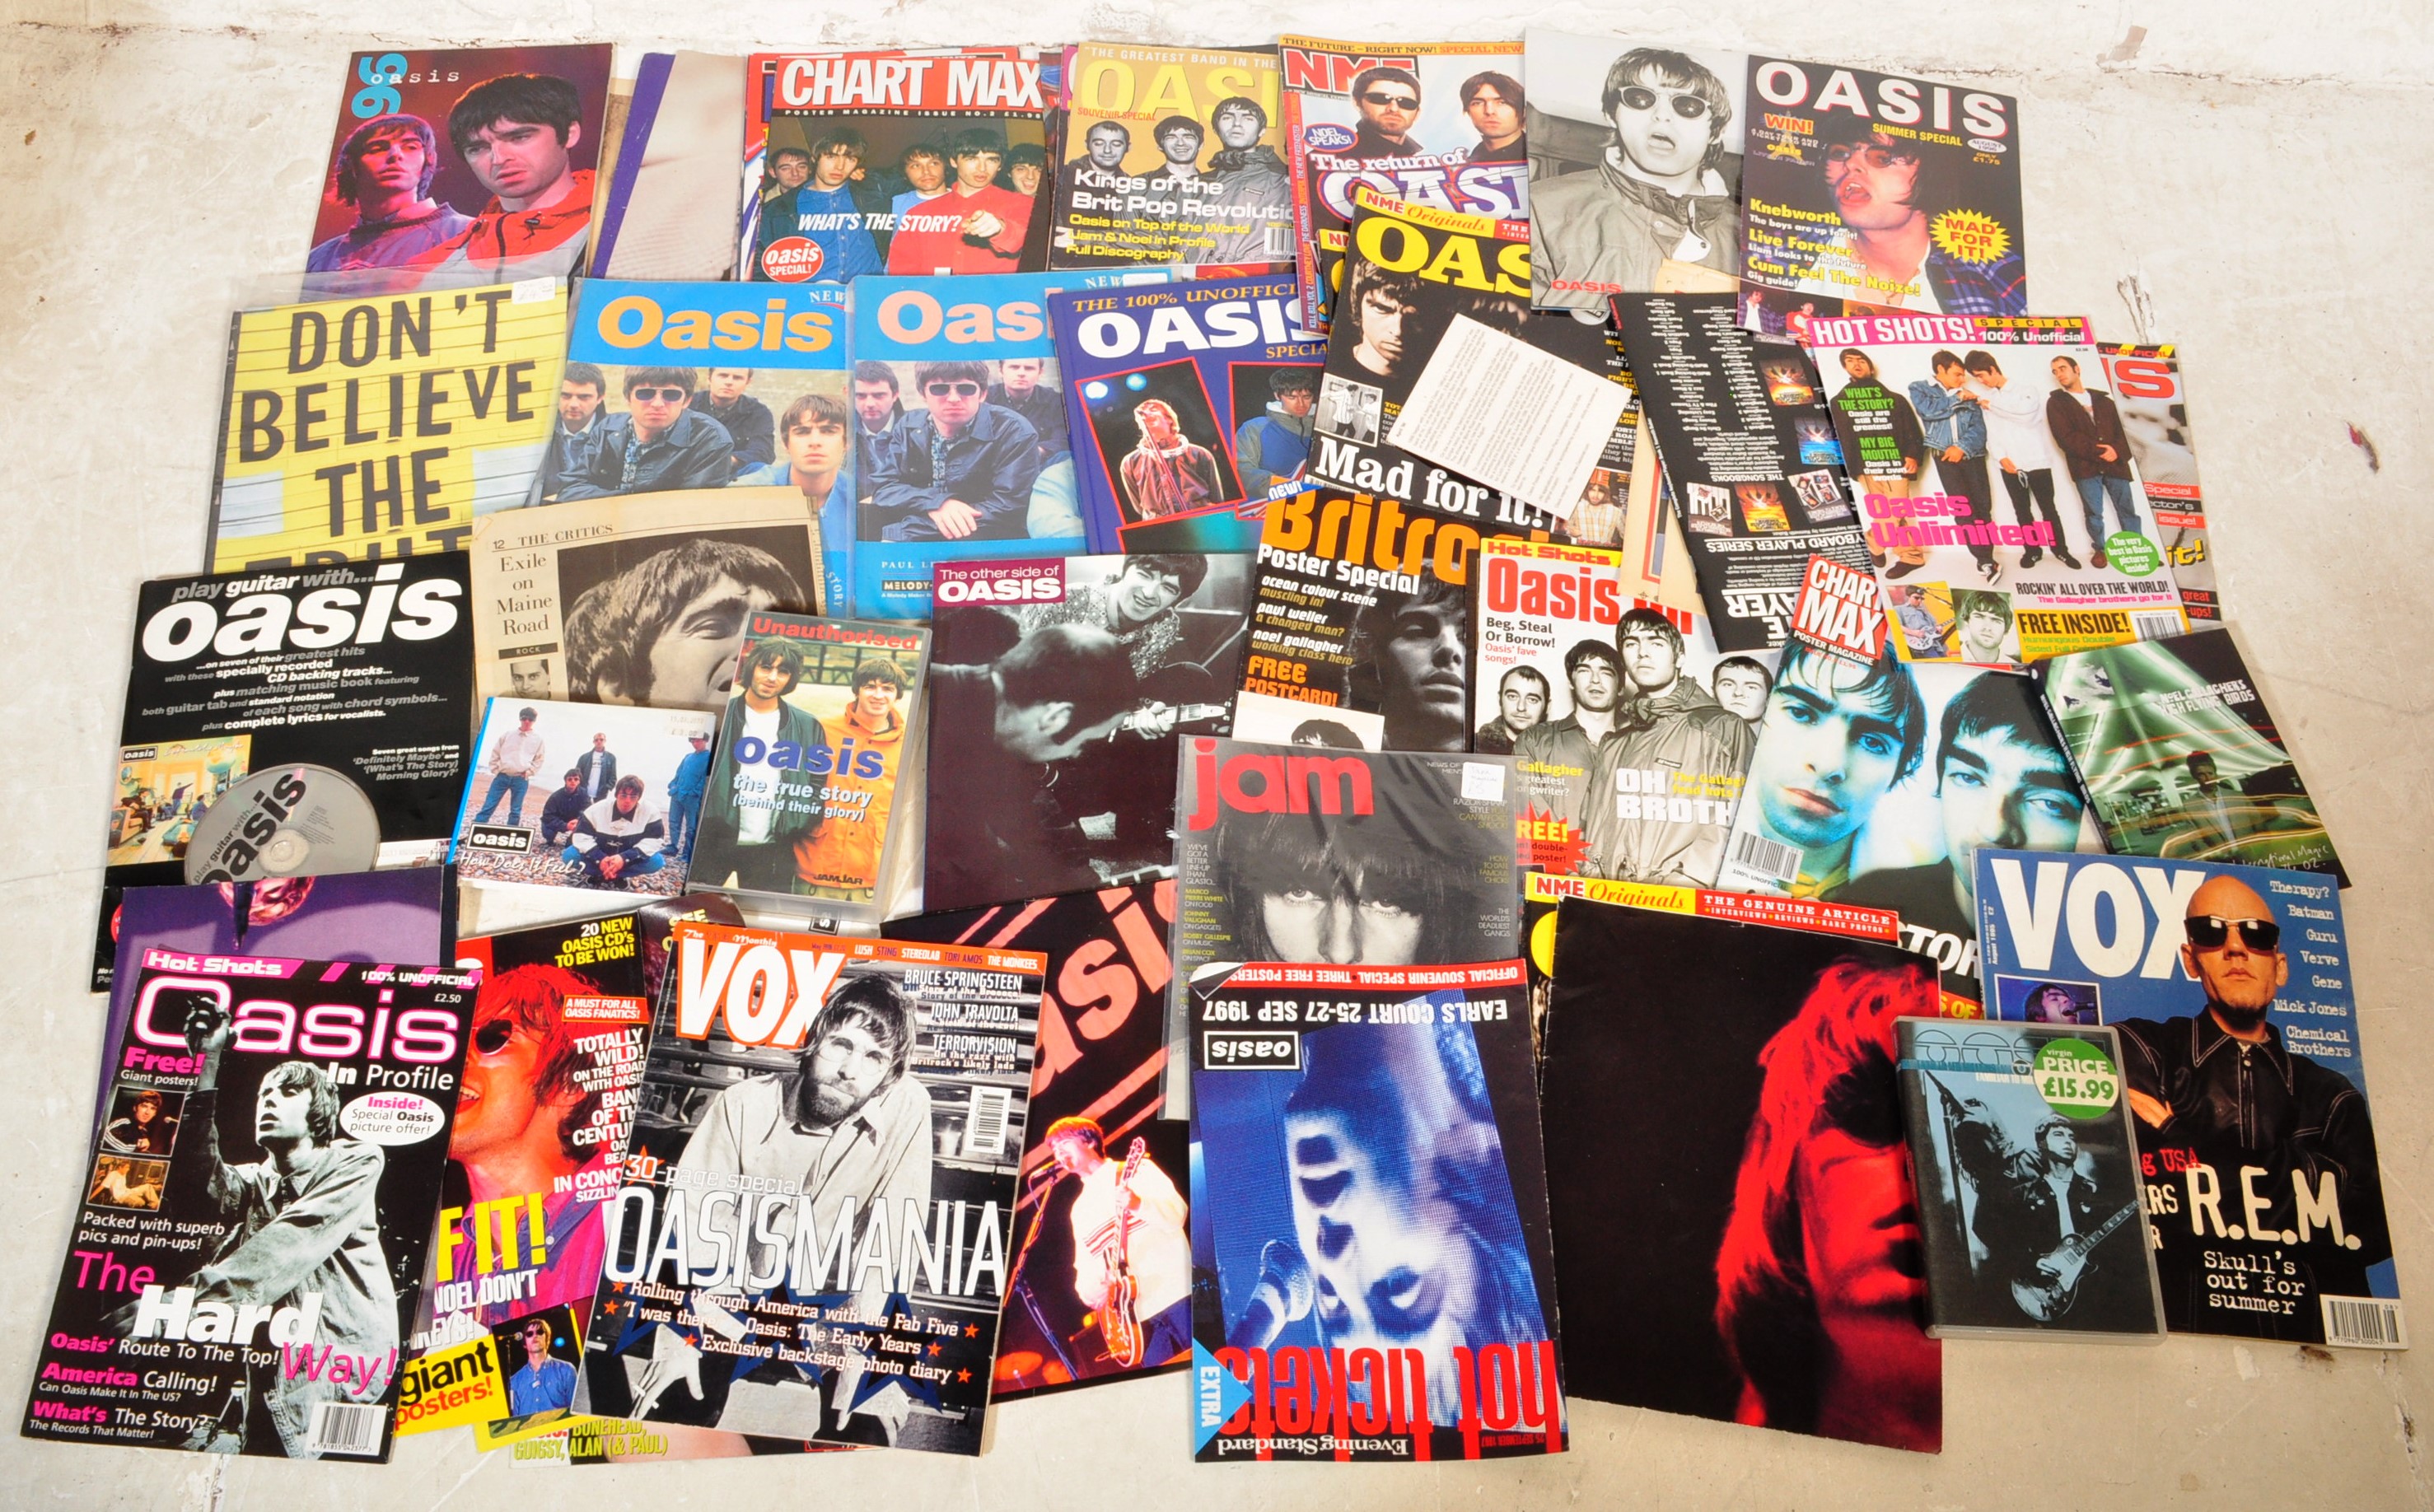 OASIS INTEREST - COLLECTION OF VINTAGE OASIS RELATED MEMORABILIA